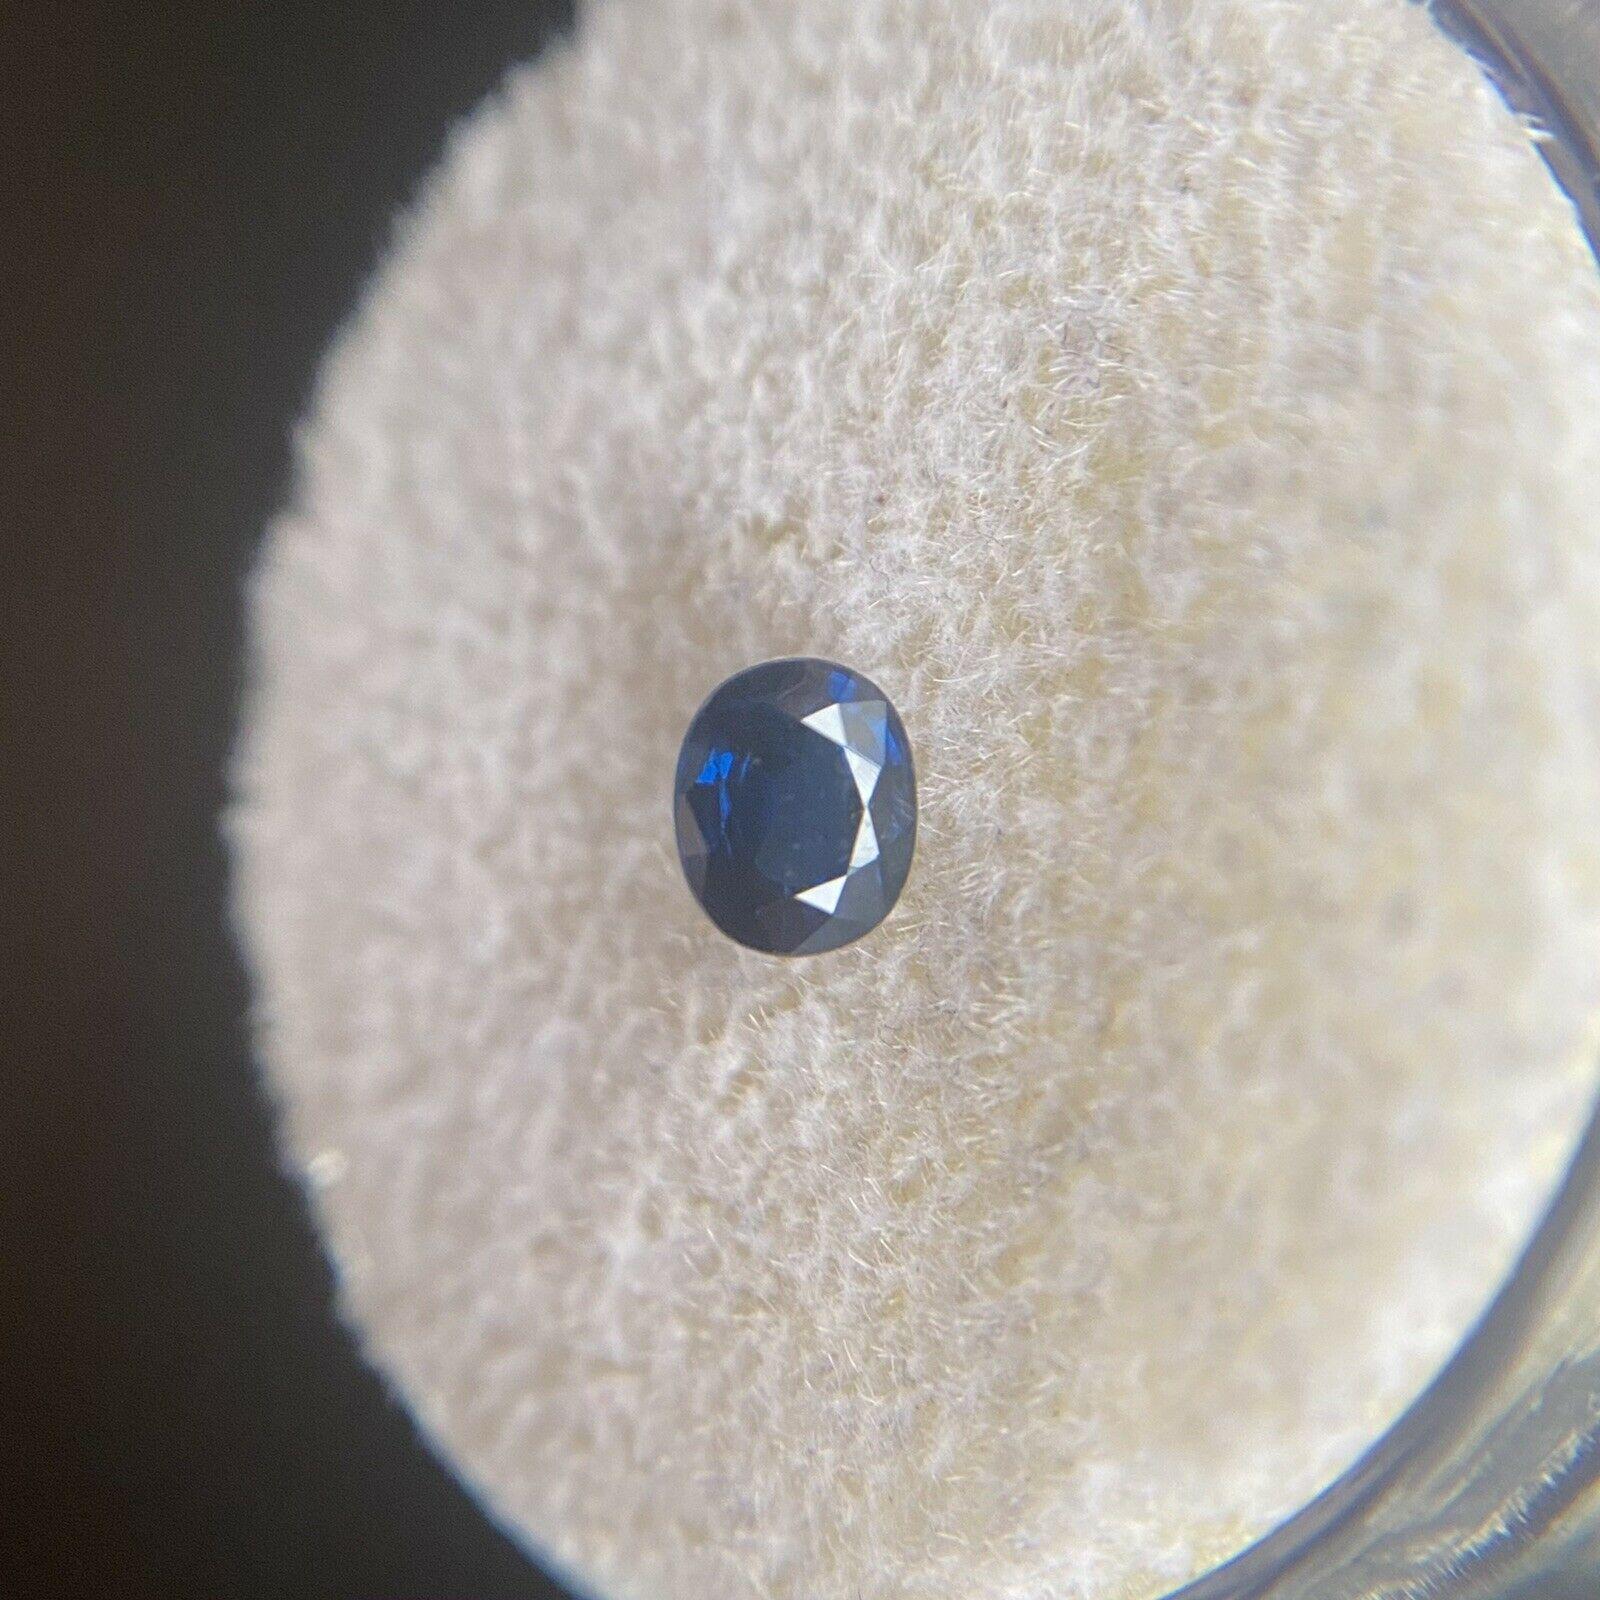 Natural Deep Blue Sapphire 0.48ct Oval Cut Loose Gem 4.6 x 3.7mm

Natural Fine Deep Blue Sapphire Gemstone. 
0.48 Carat with a beautiful deep blue colour and good clarity, a clean gem with only some small natural inclusions visible when looking